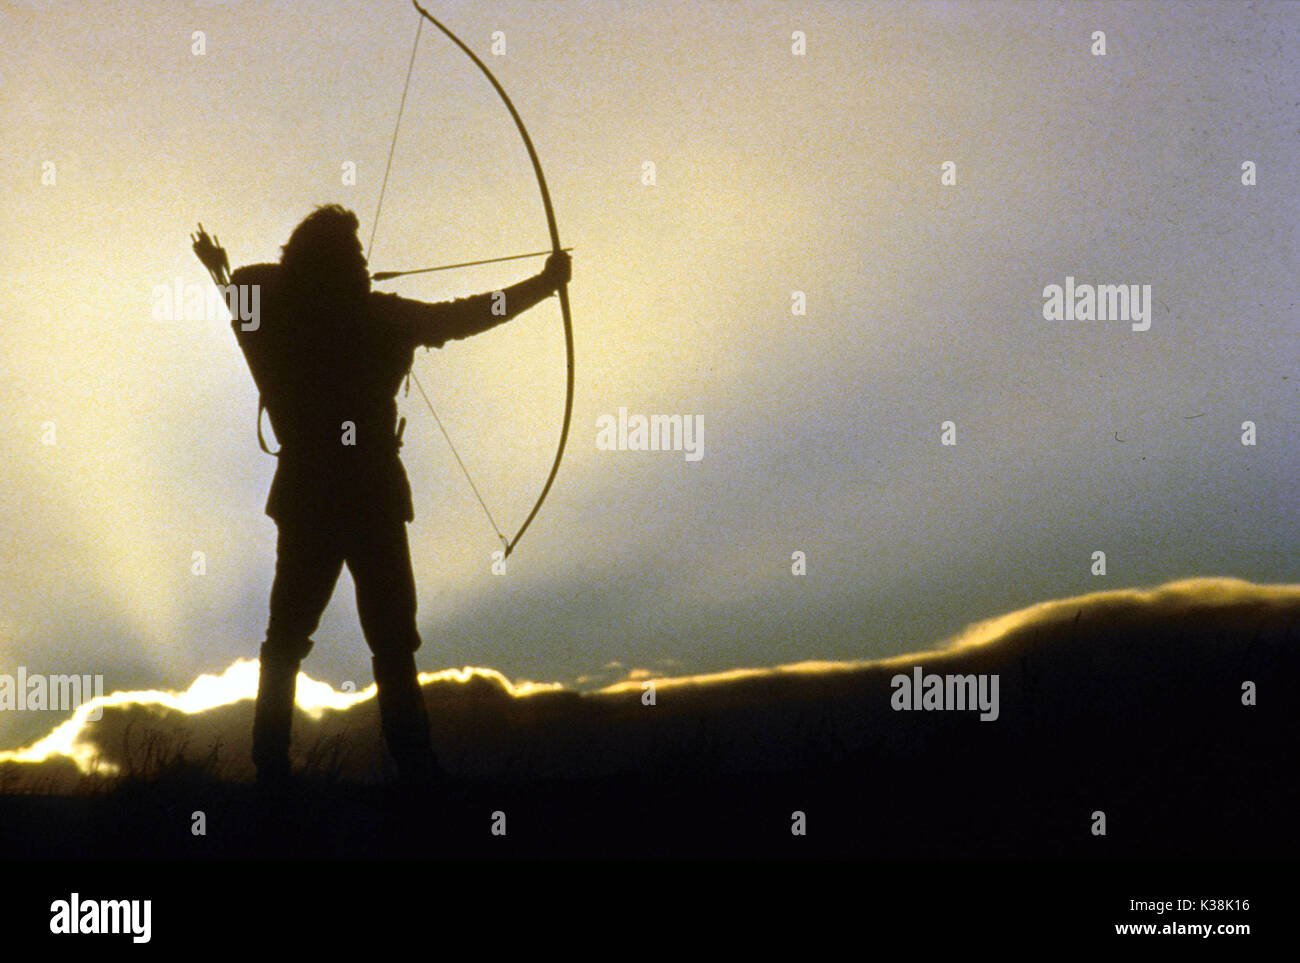 ROBIN HOOD: PRINCE OF THIEVES KEVIN COSTNER     Date: 1991 Stock Photo